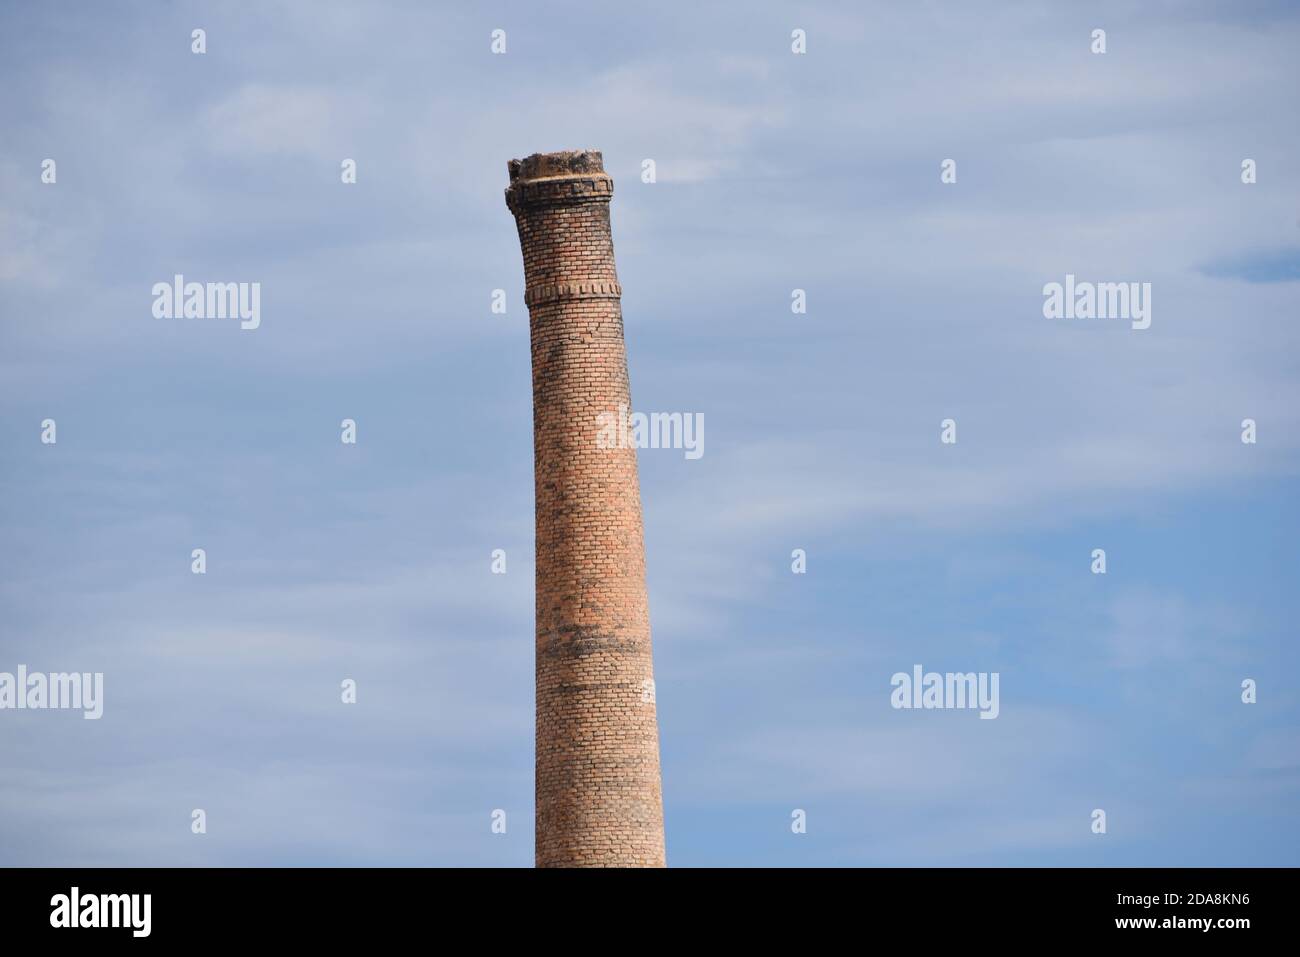 An old brick chimney leans defiantly against a mottled blue sky, in this photo taken in Oliva, Spain Stock Photo